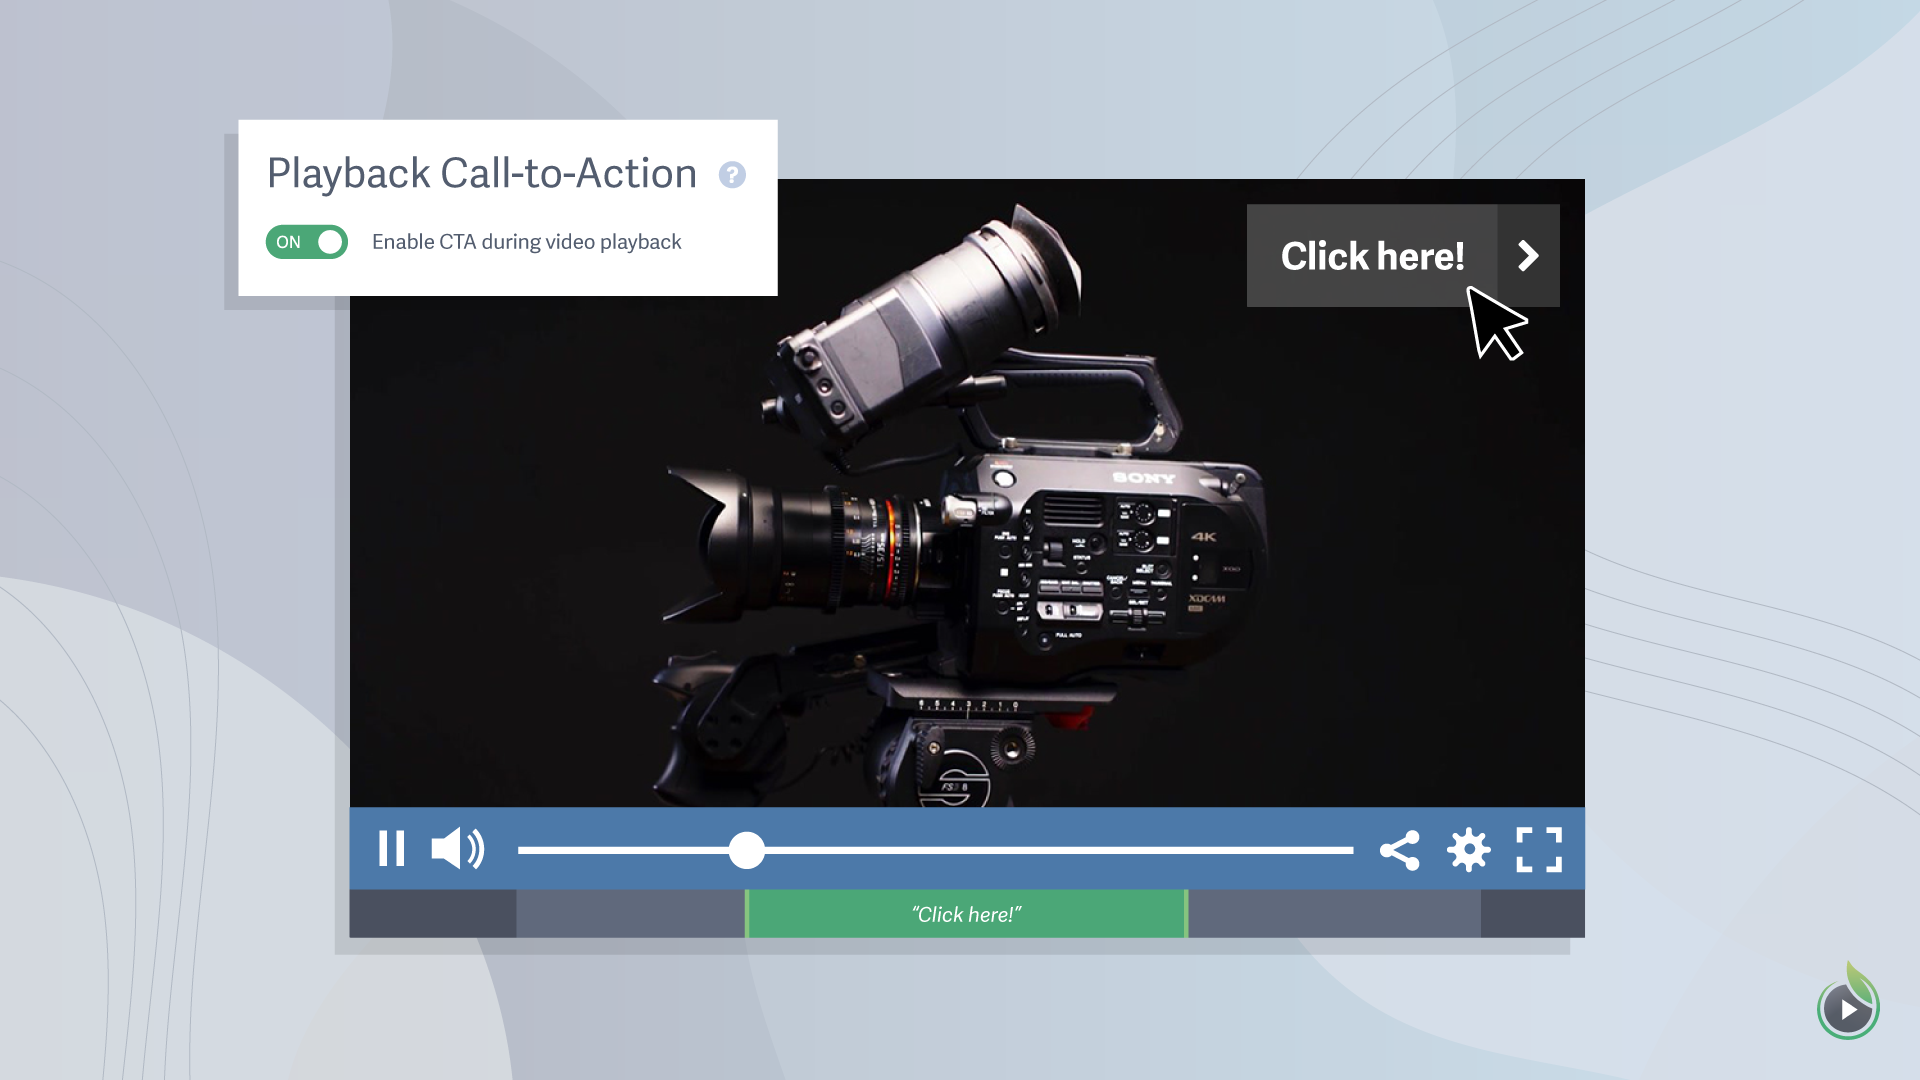 Use in-player calls-to-action to collect highly valuable viewer information and guide viewers after your videos are finished.